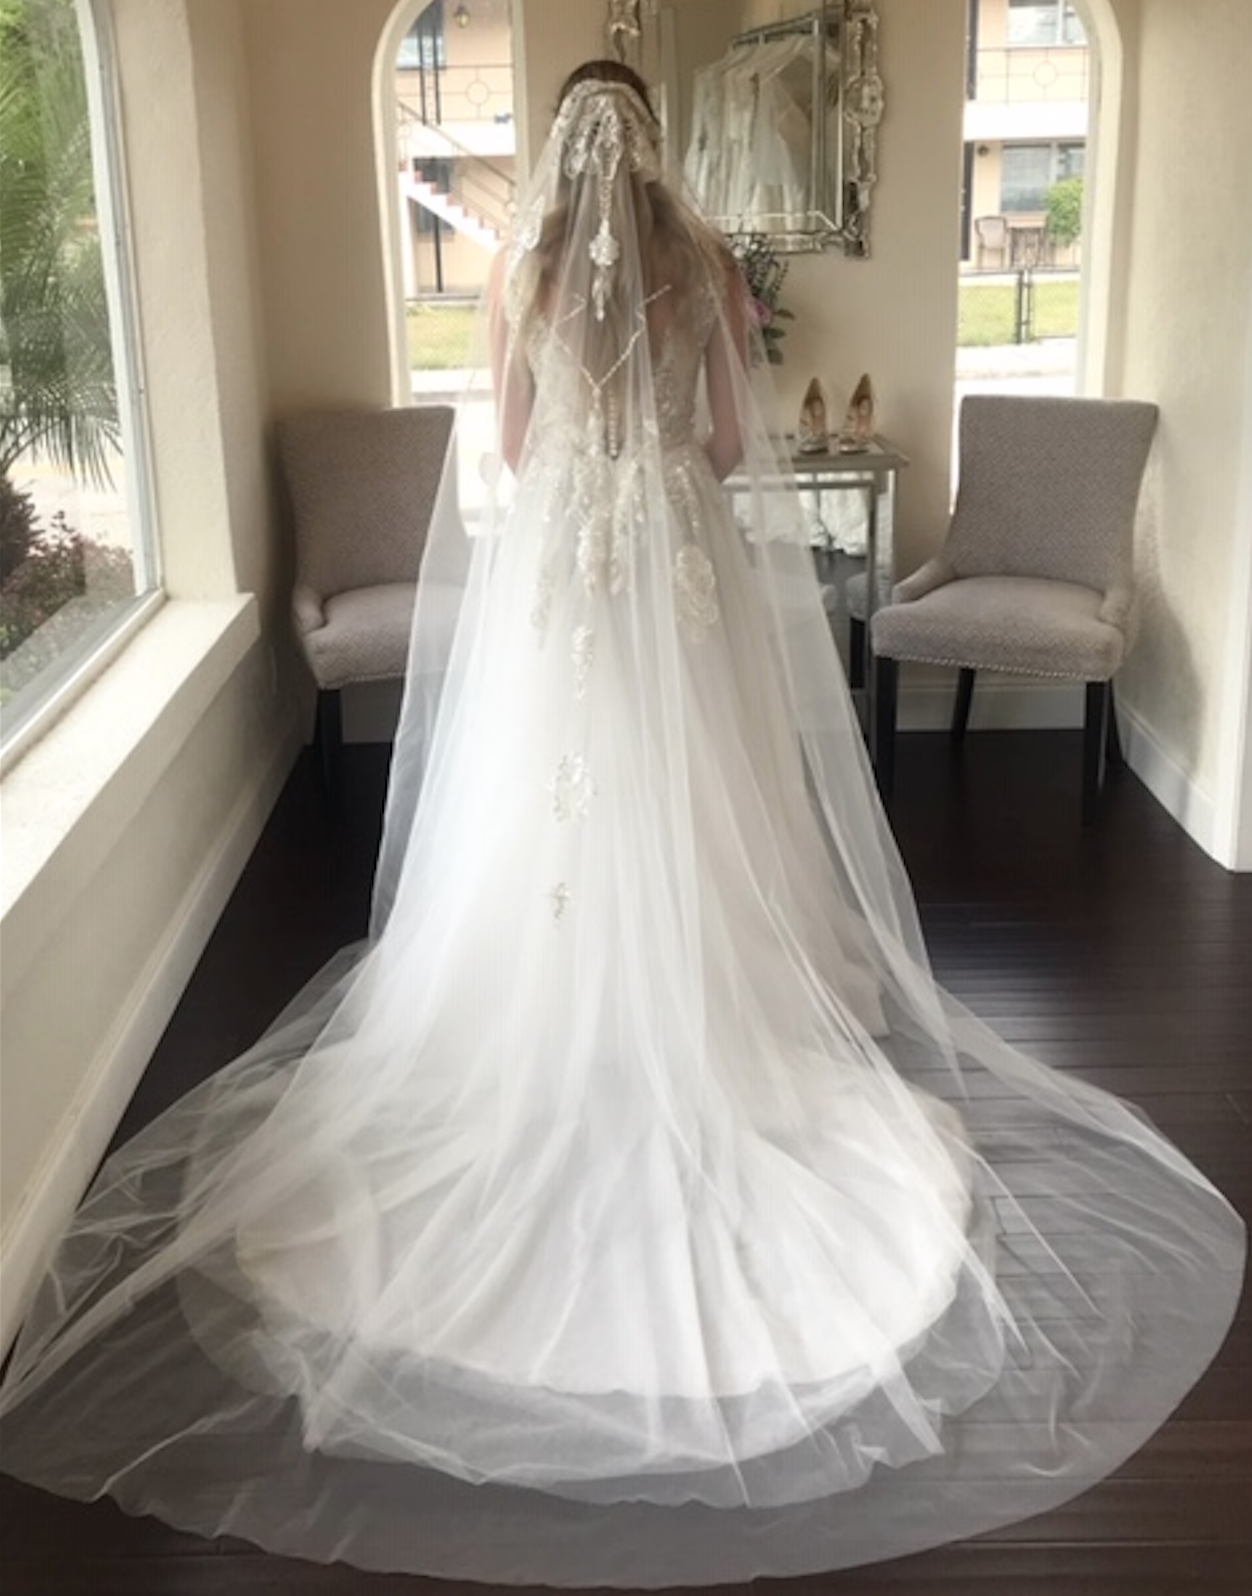 Wedding Veil: How to Choose One to Compliment Your Bridal Gown Style